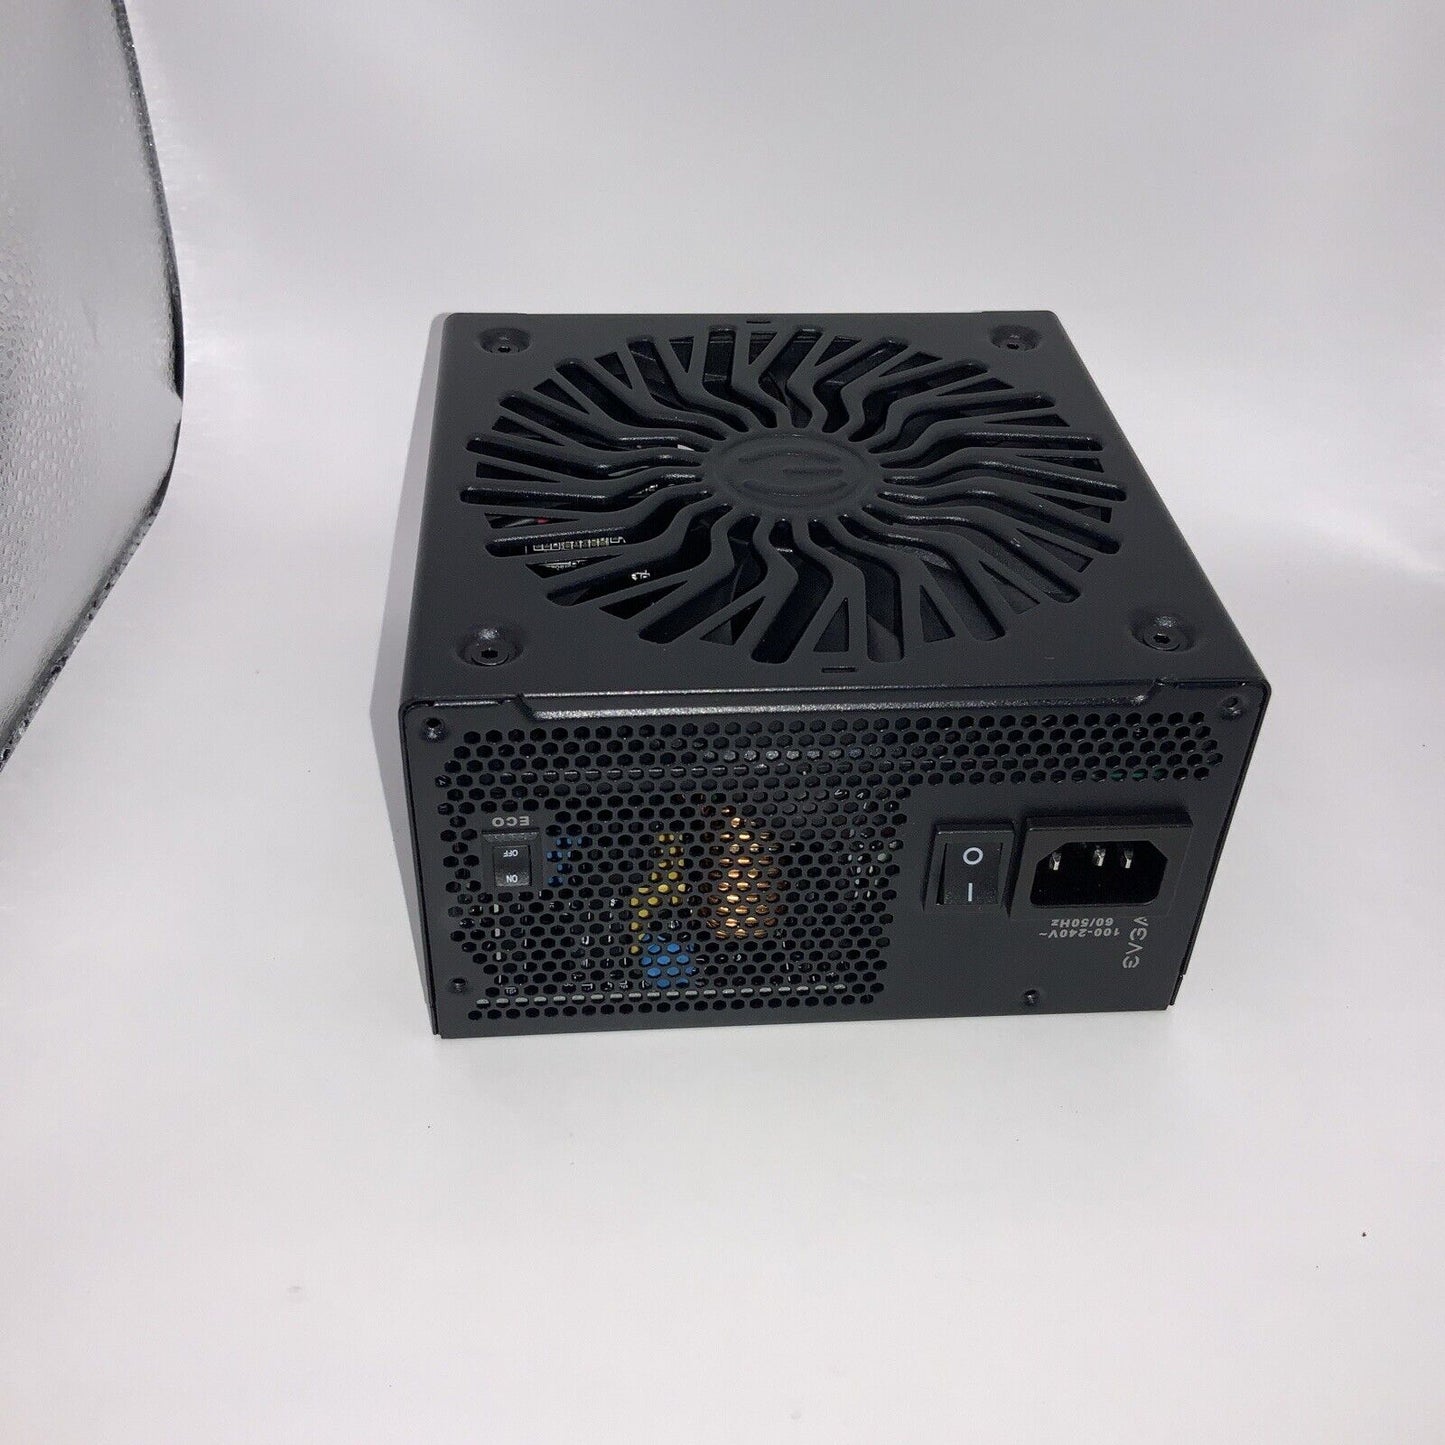 EVGA SuperNOVA 1000 GT 1000W Gold Power Supply (220-GT-1000-X1) **FOR PARTS**